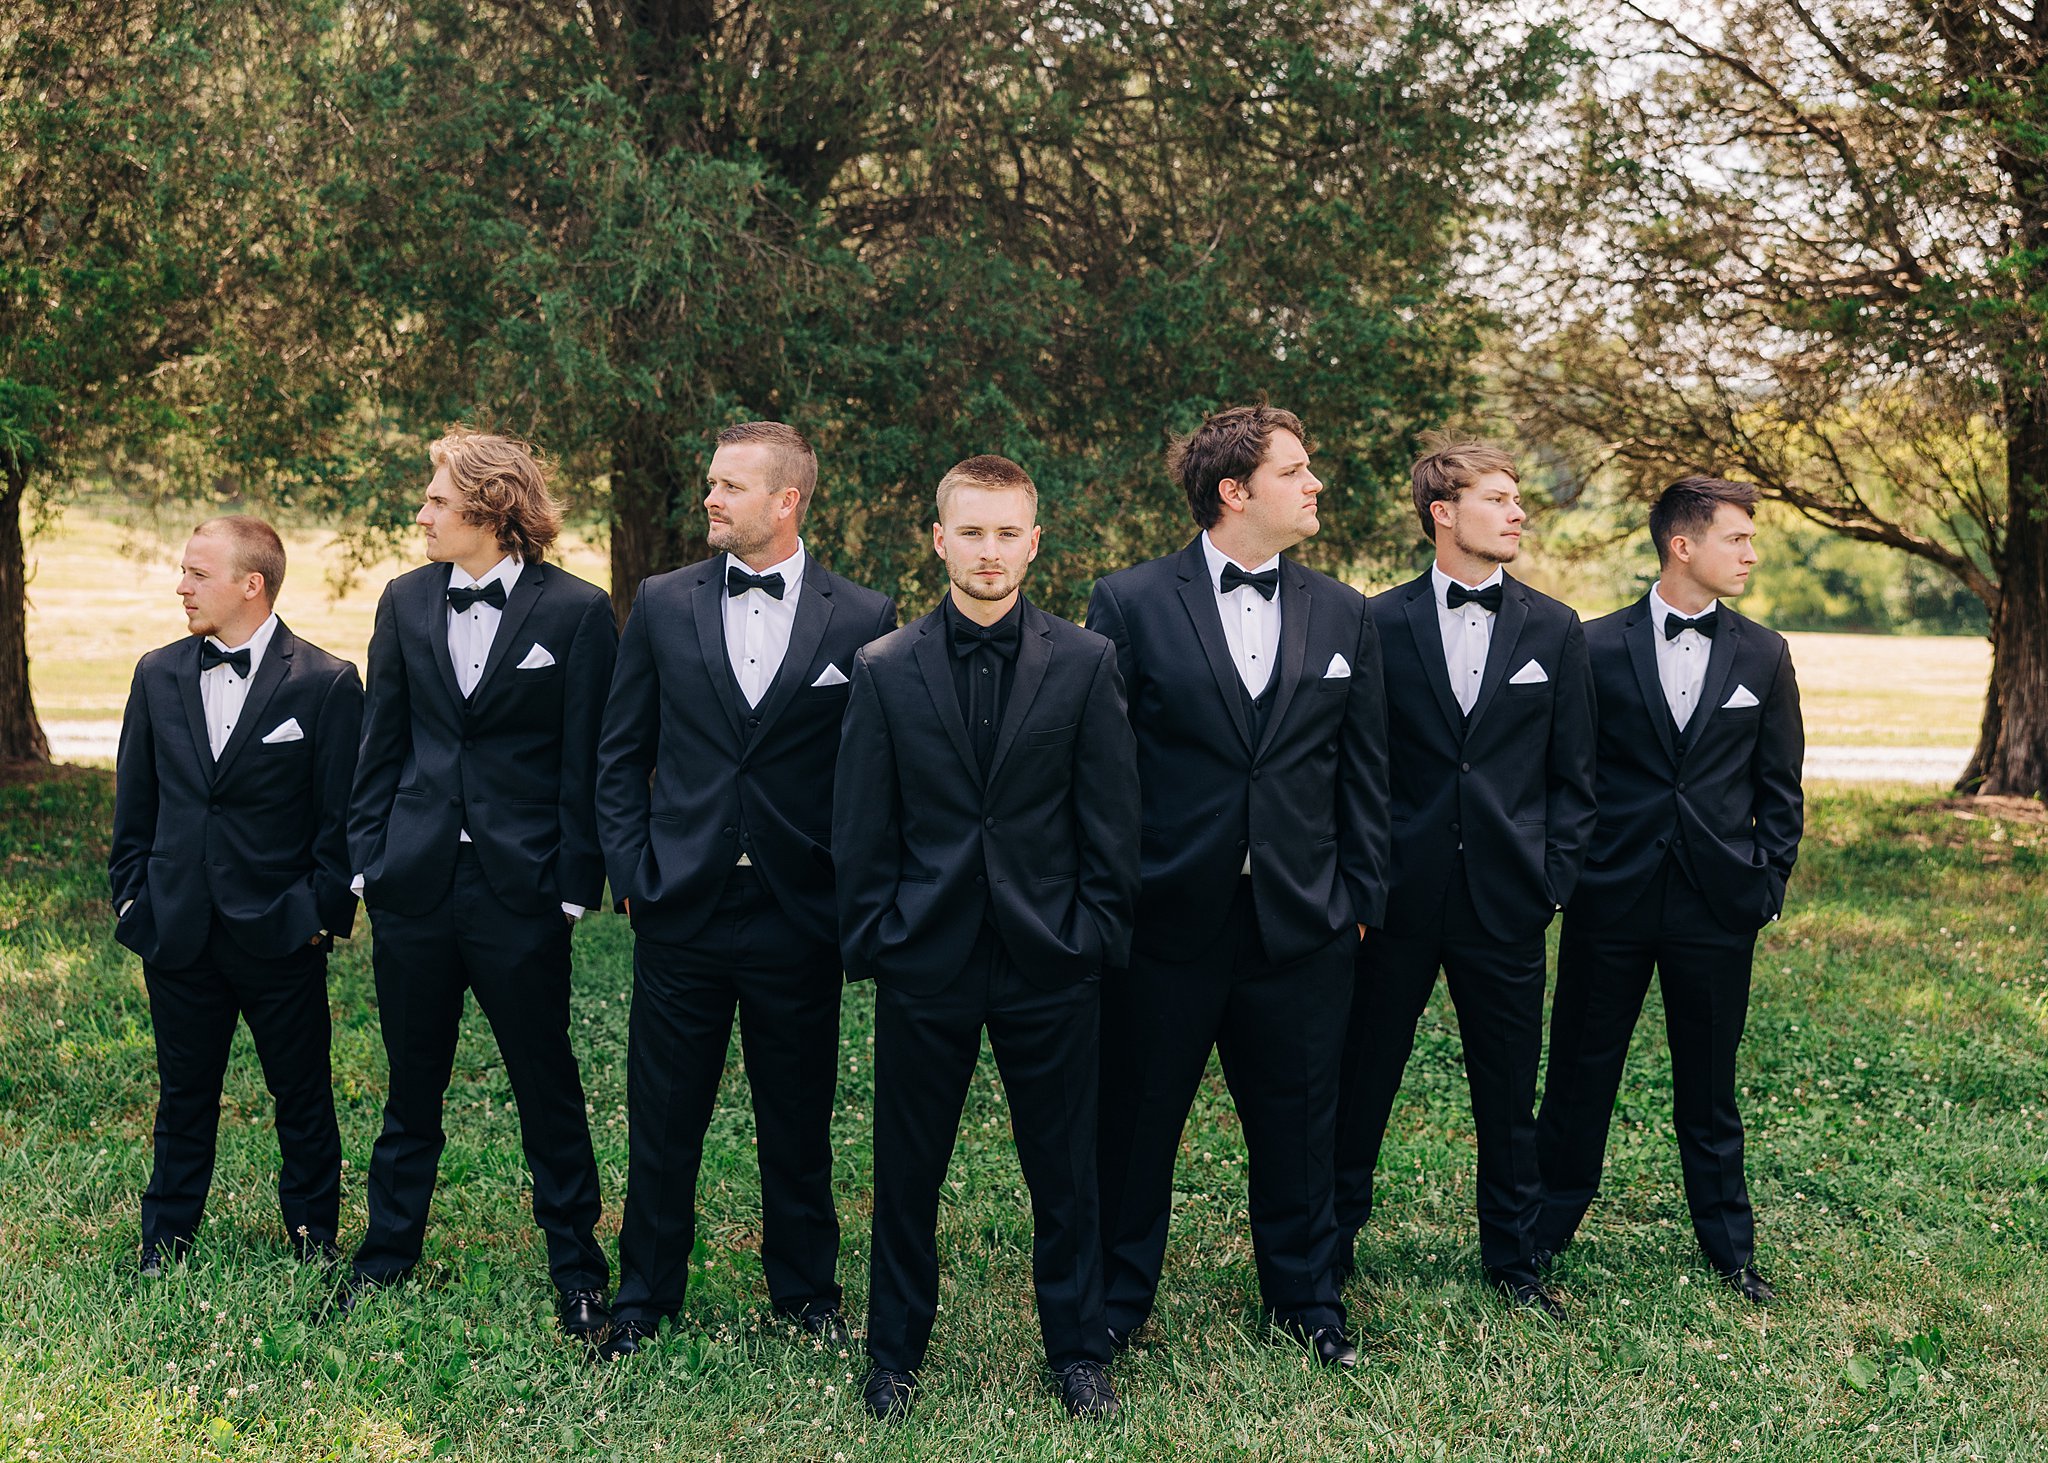 A groom stands with his hands in his pockets in a black suit with his groomsmen around him